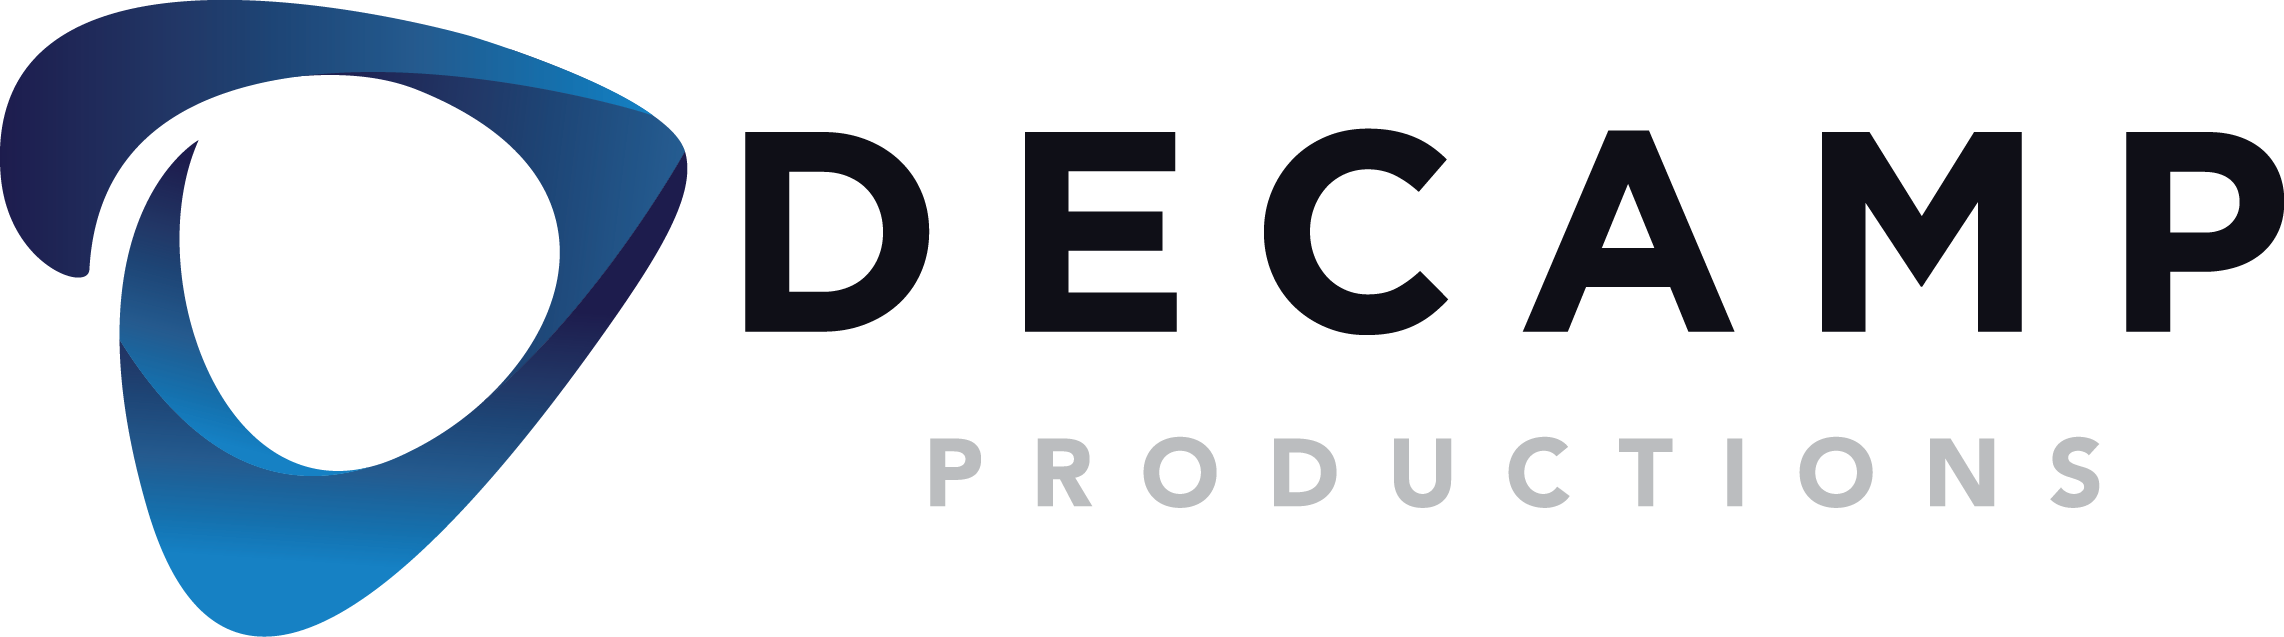 Decamp Productions Logo